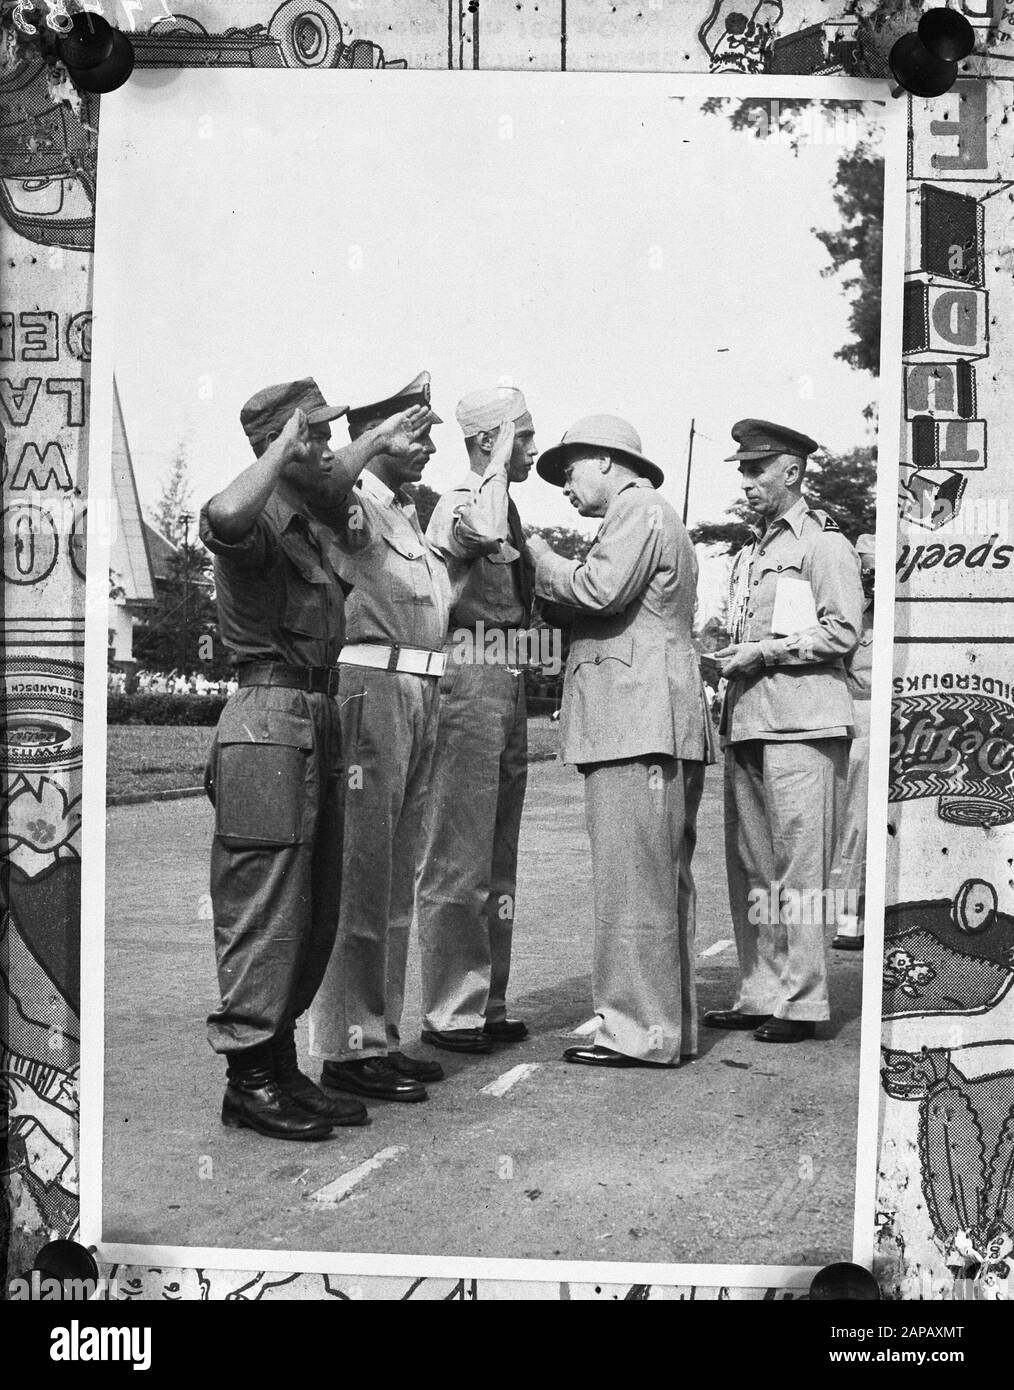 Batavia 28-10-'47. H.E. The Lt. Gouv. Gen. Dr. H.J. van Mook during the presentation of the honorary metal to the decorated, v.r.n.; Oh, Maj. C. Knulst, Kapt. J.C.A. Faber and Javanese Corporal Kemis Bin Panoe. Annotation: Repronegative. See DLC 5684 Date: 28 October 1947 Location: Batavia, Indonesia, Jakarta, Dutch East Indies Keywords: awards Person name: Mook, H.J. van Stock Photo